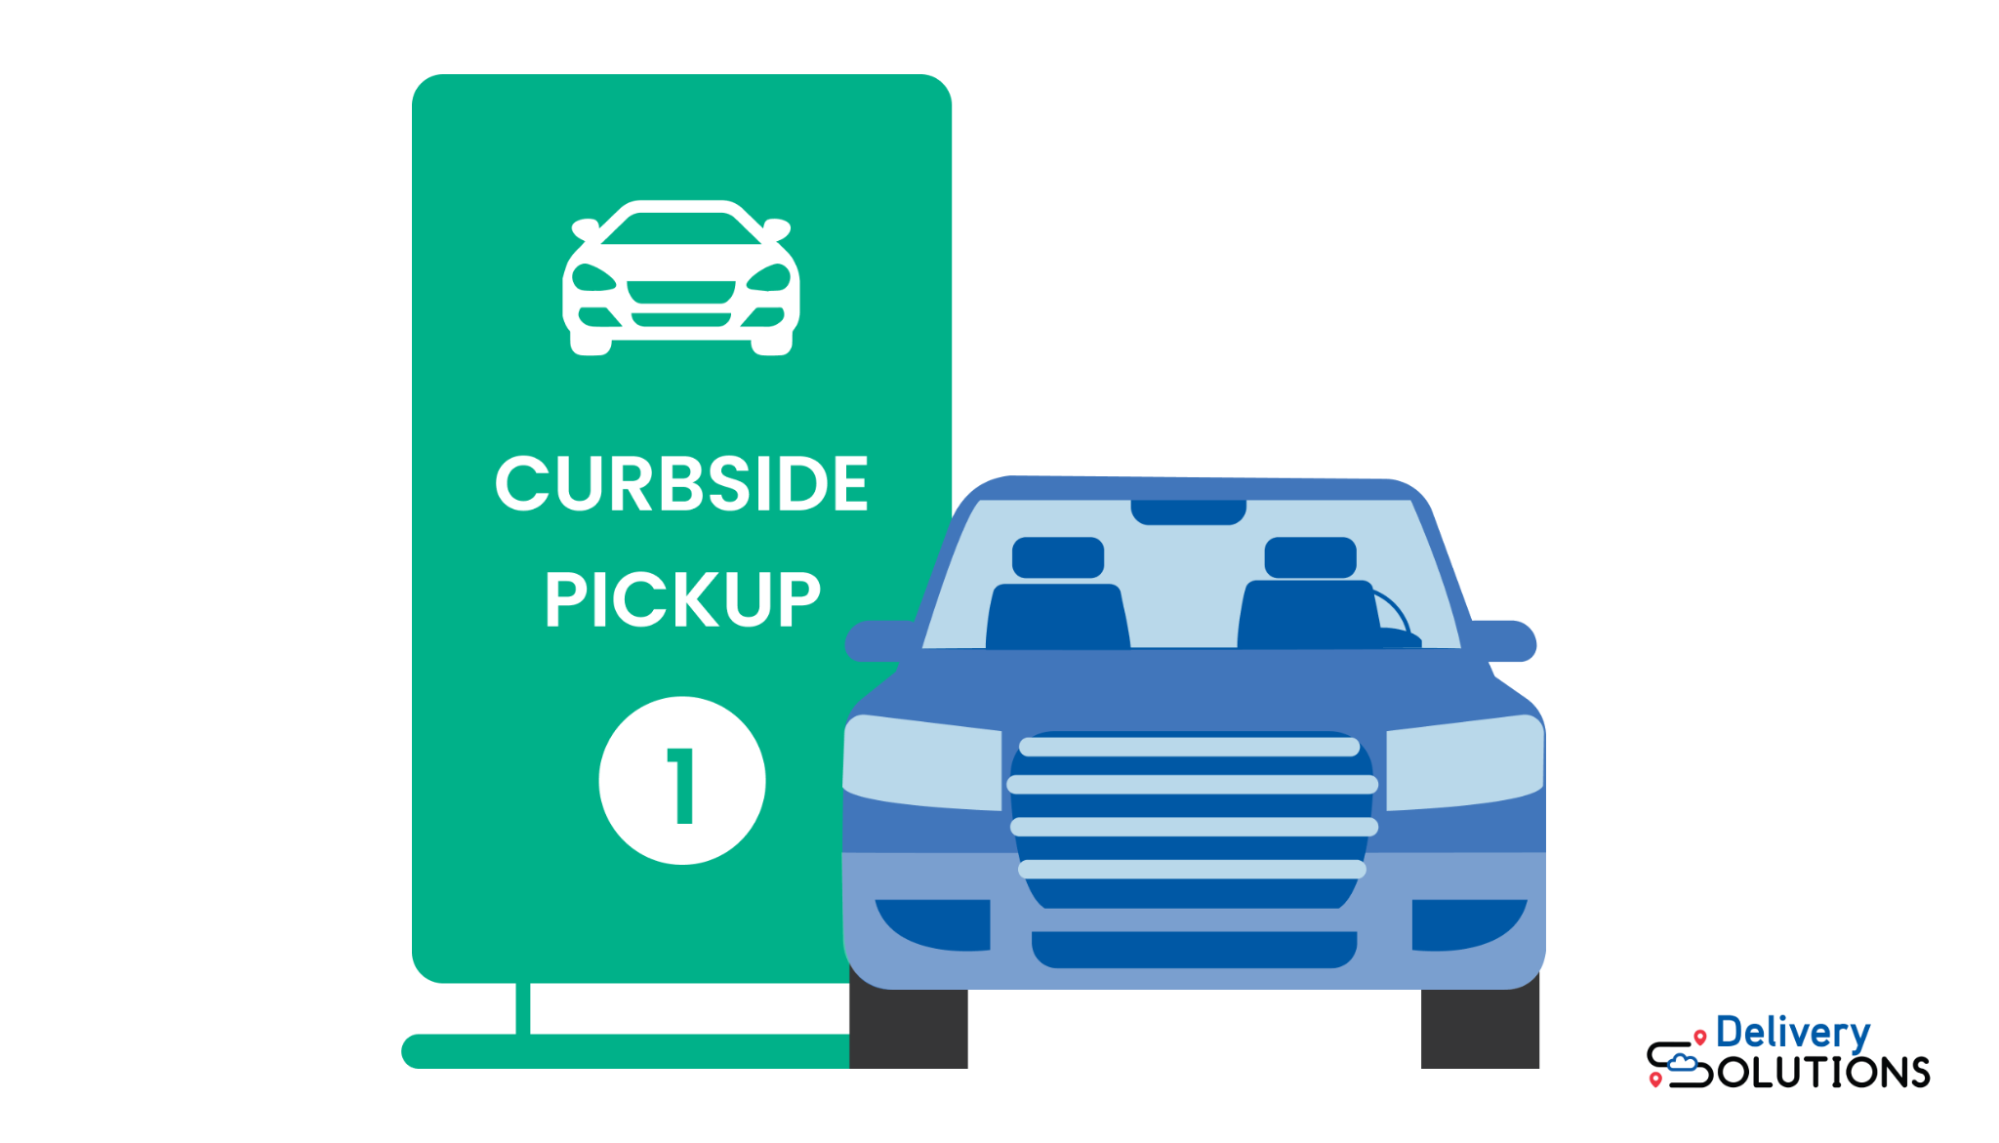 Designated curbside collection parking